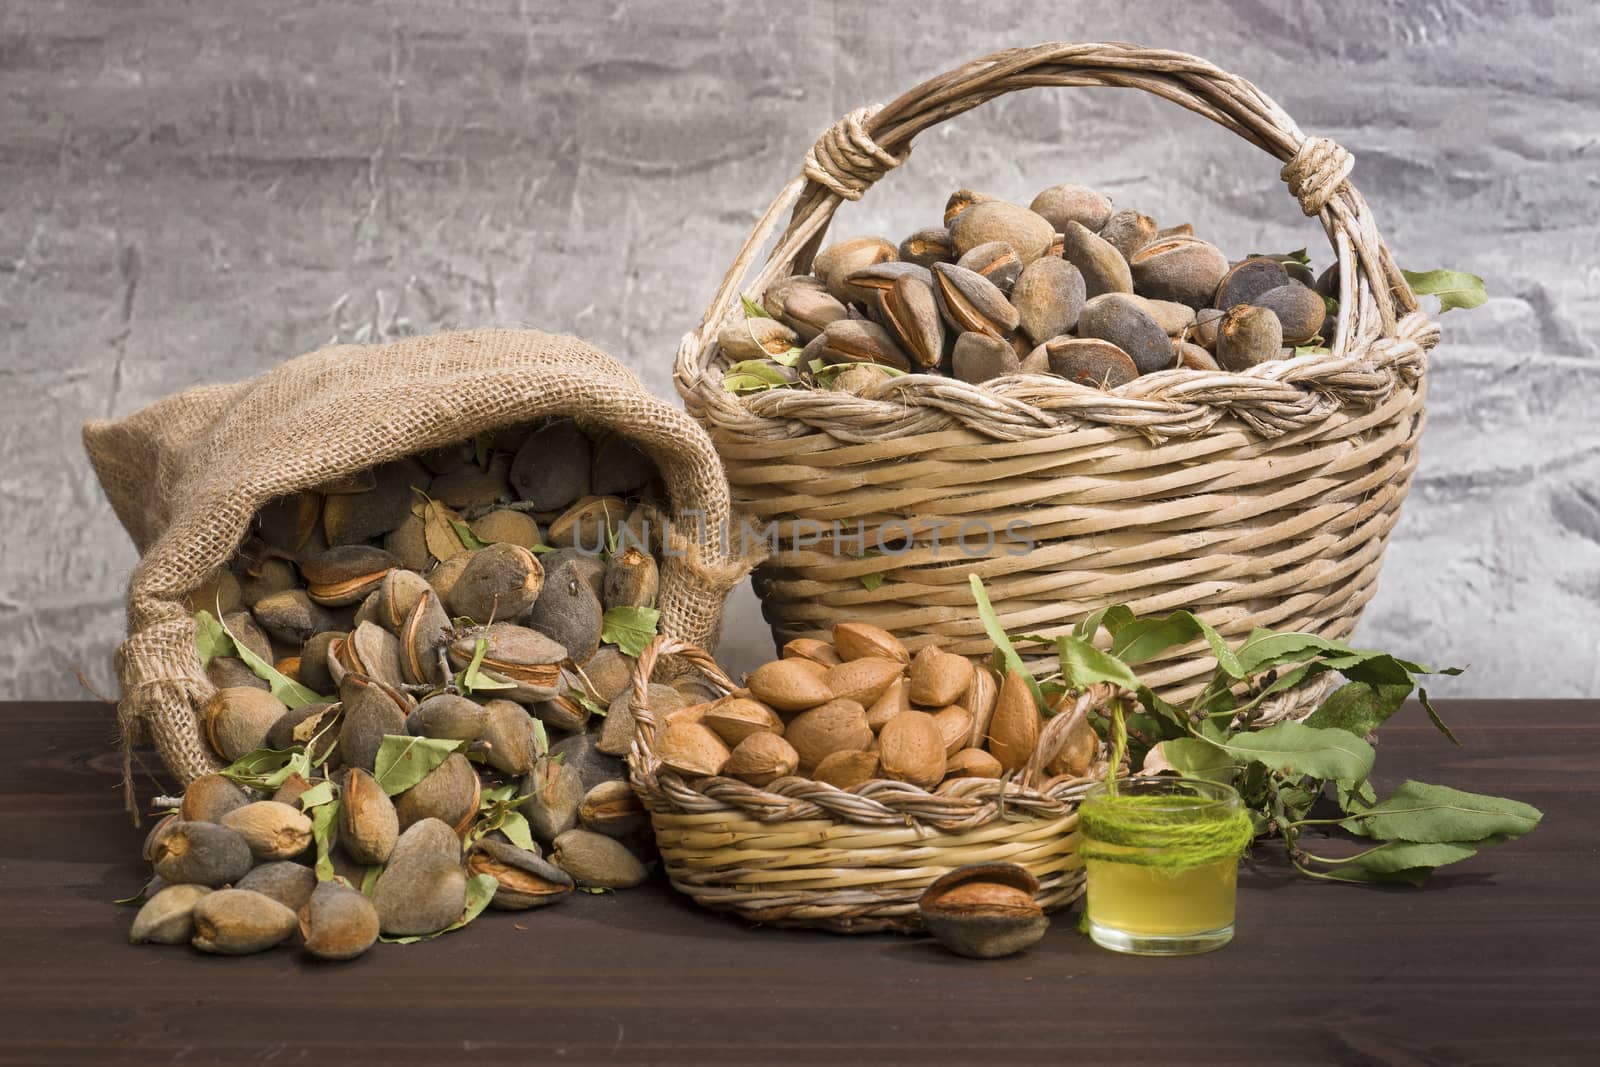 Almonds over rustic wooden board. by osmar01